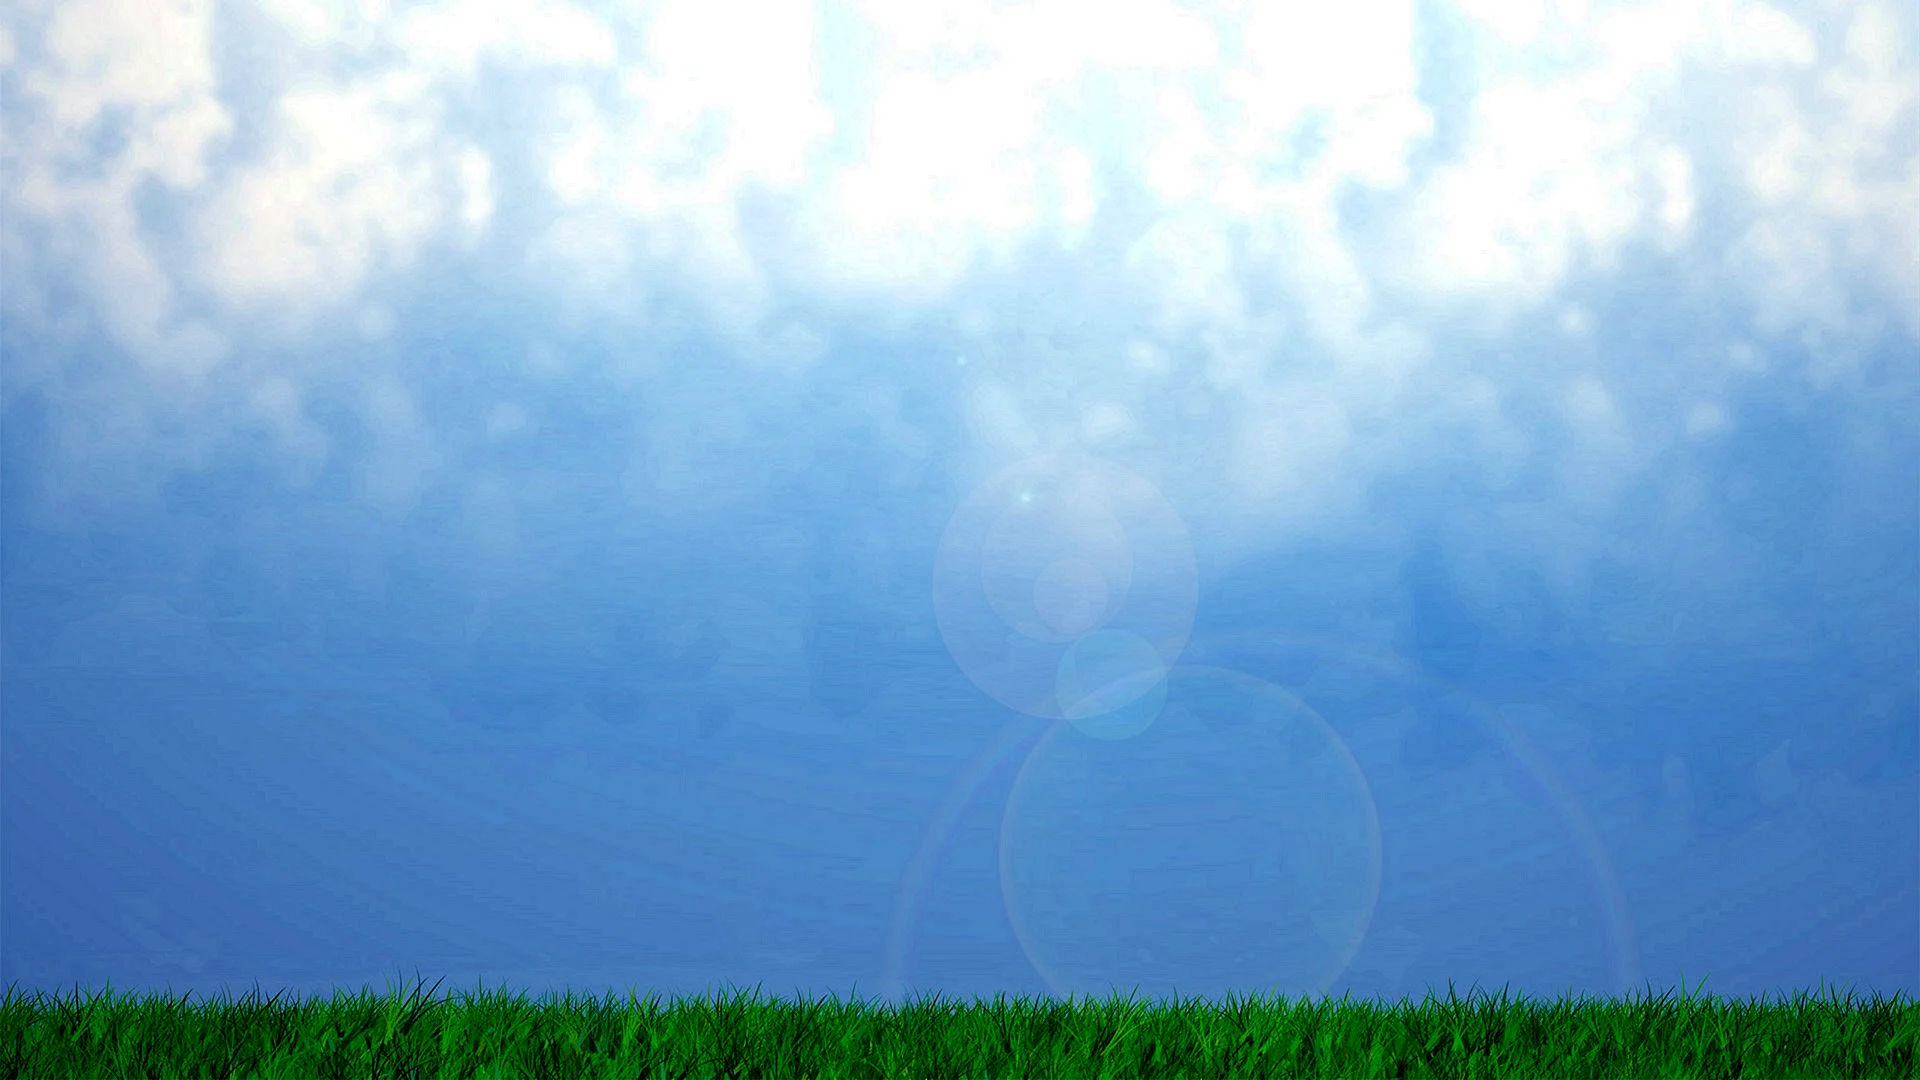 Sky And Green Grass Background Wallpaper